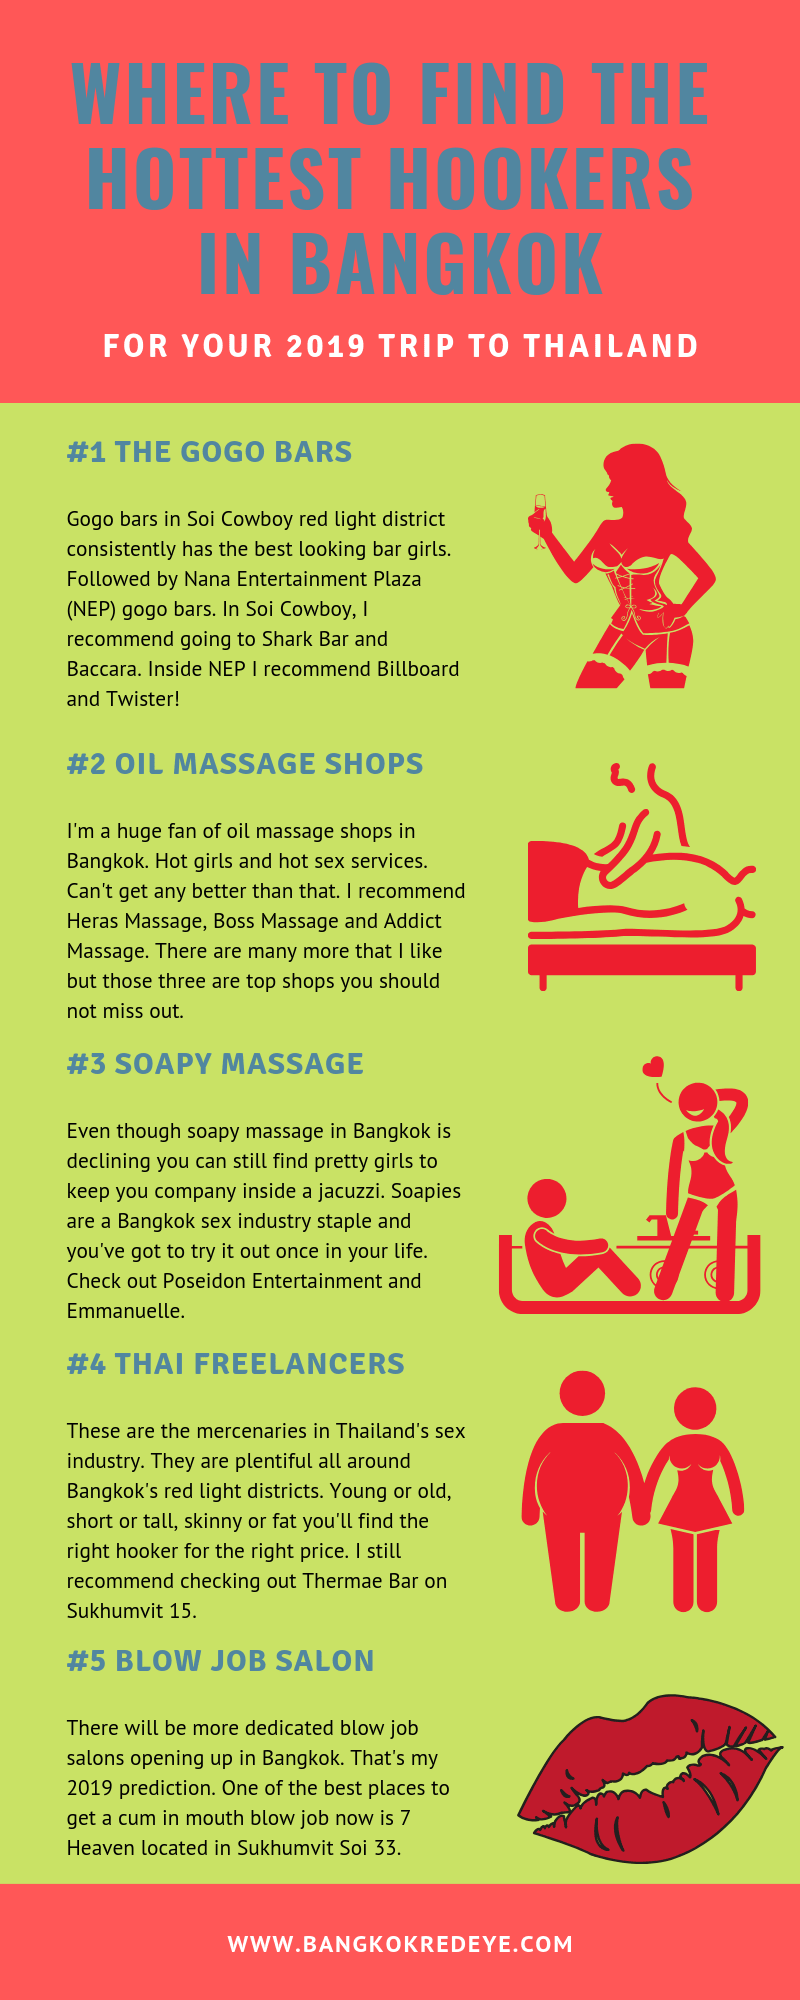 Asian Massage Parlor & Spa Guide to a Happy Ending